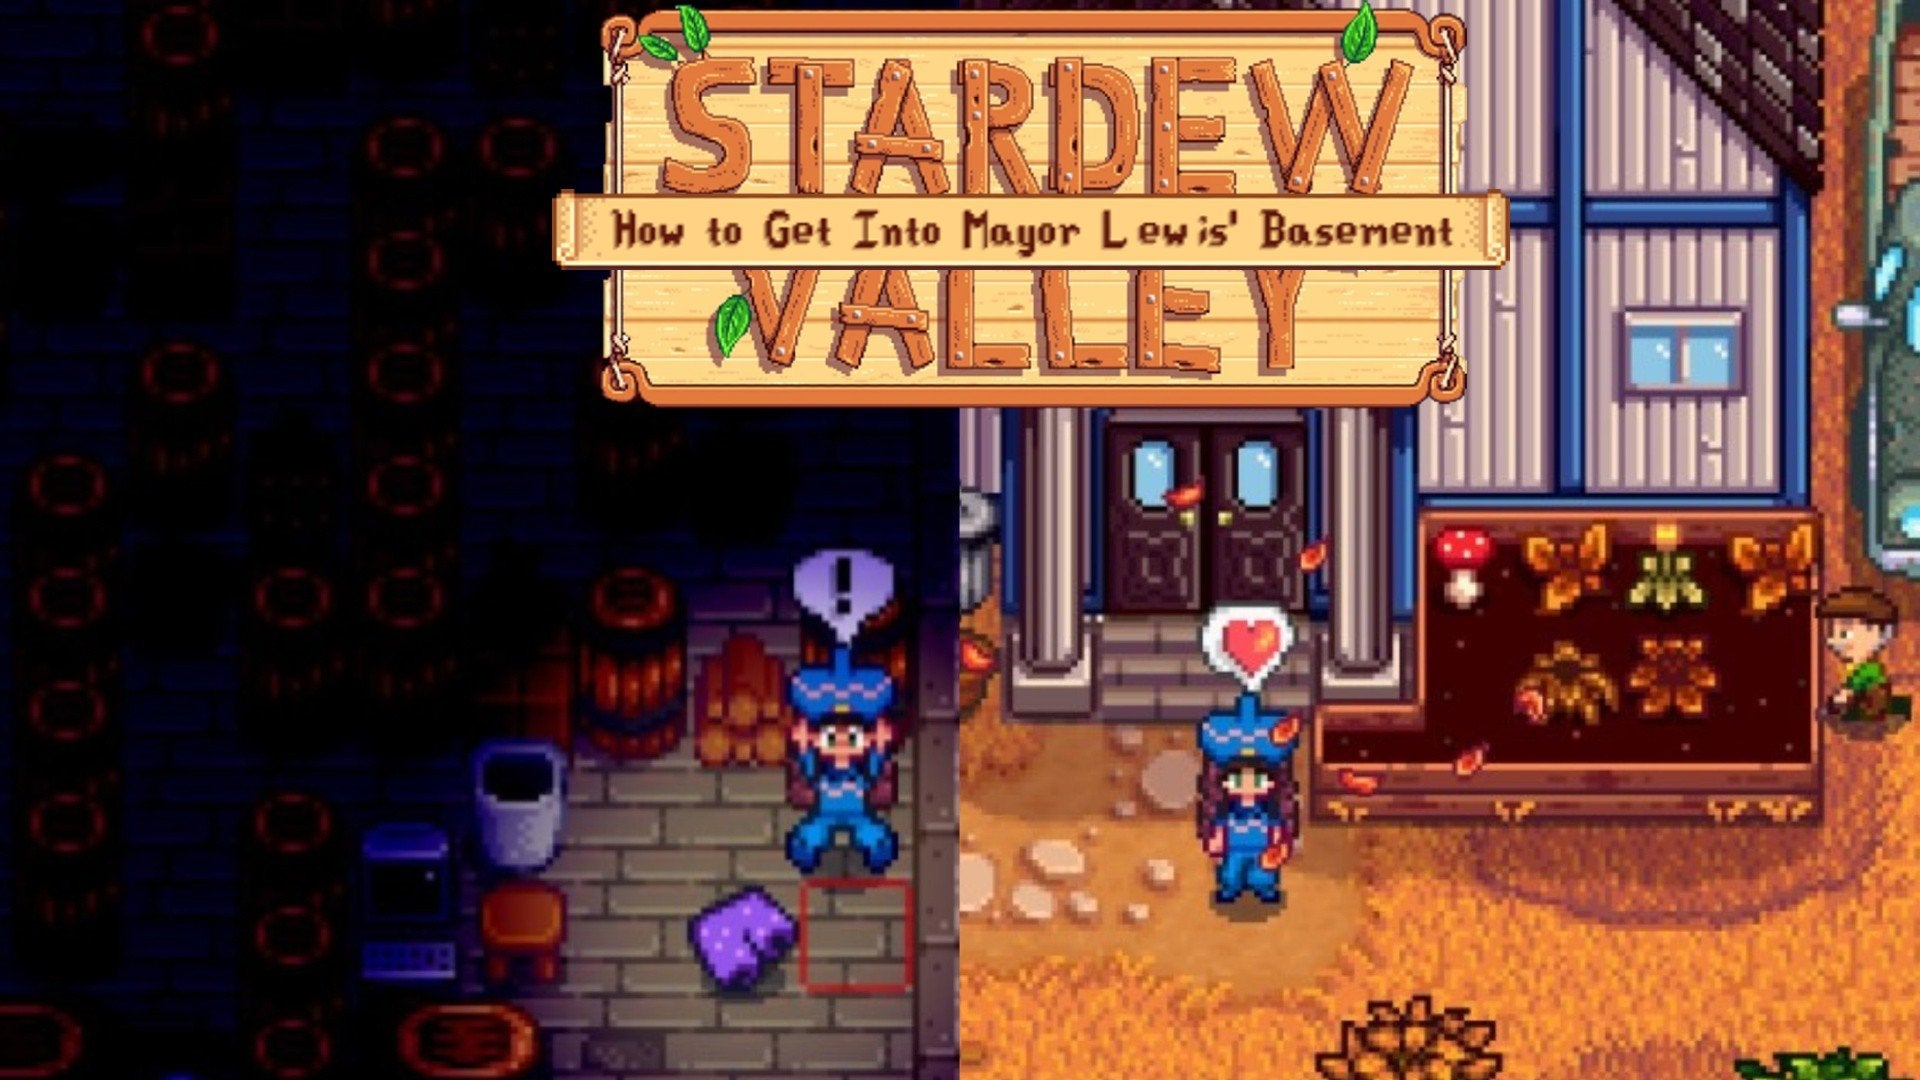 To the left is a player standing next to Mayor Lewis' Lucky Purple Shorts in his basement. To the right is a player standing in front of Mayor Lewis' house.